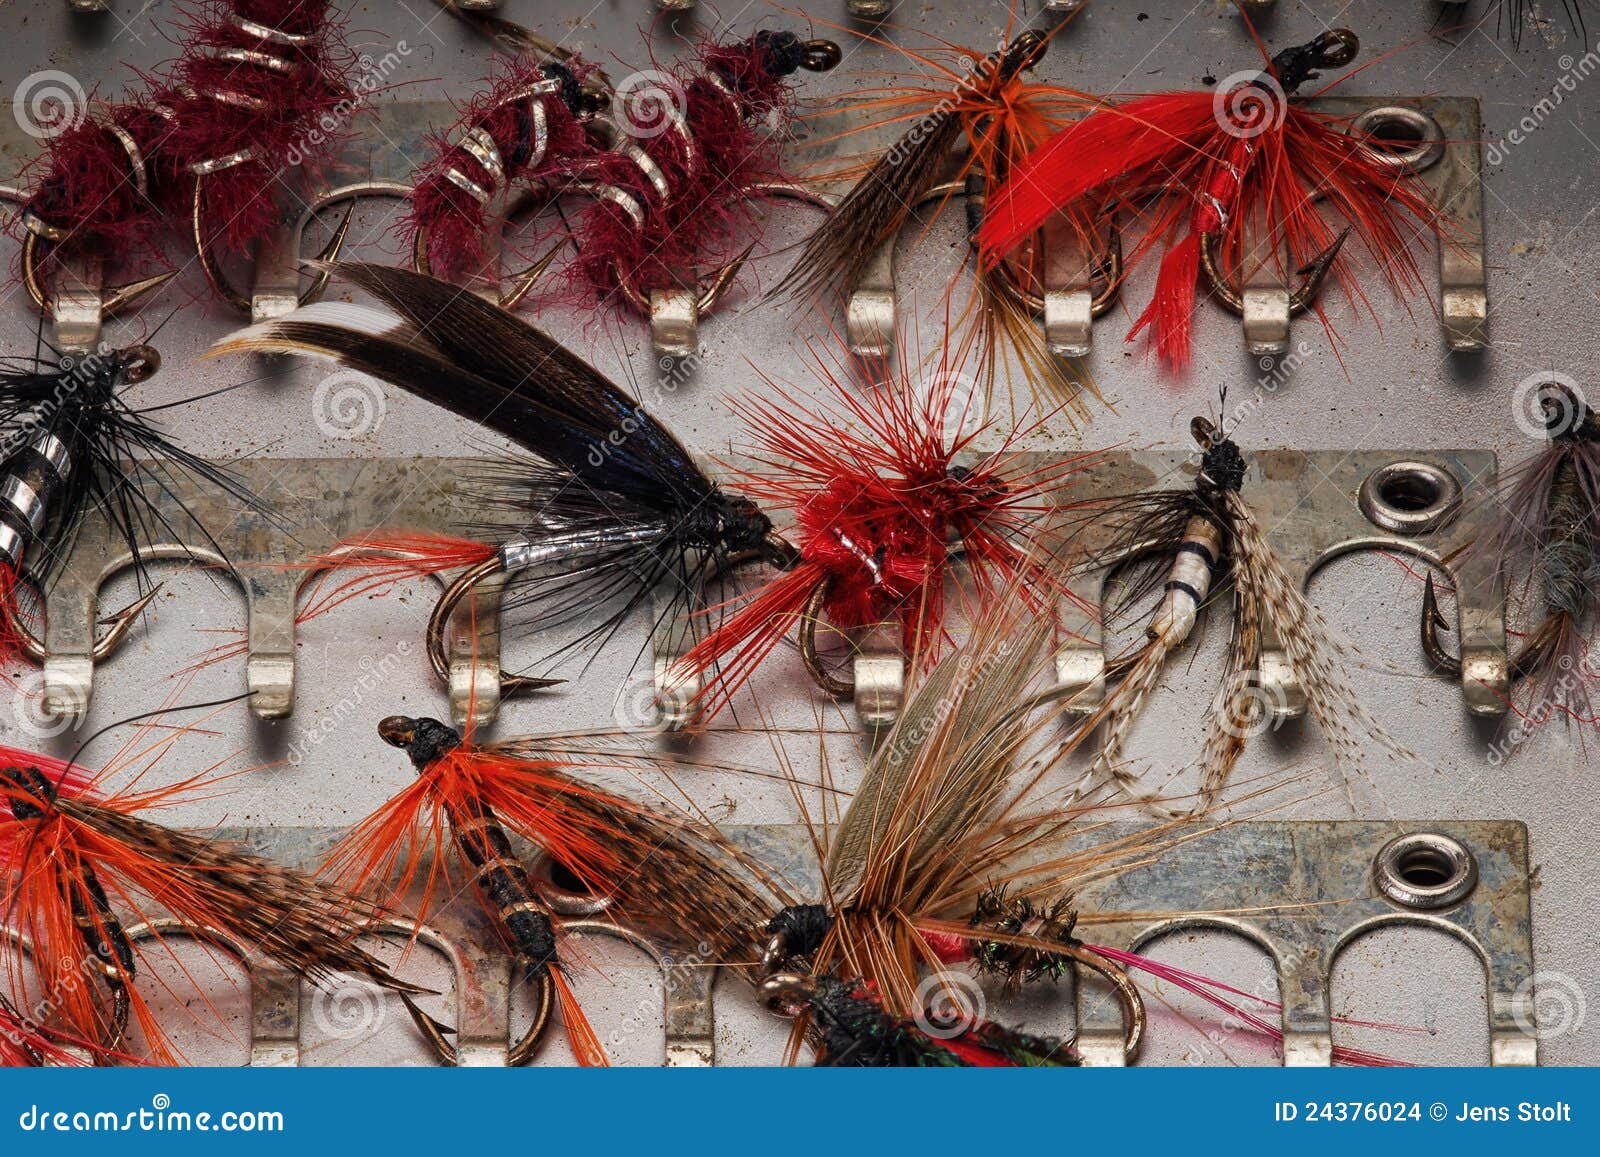 Trout flies stock photo. Image of nature, close, lure - 24376024